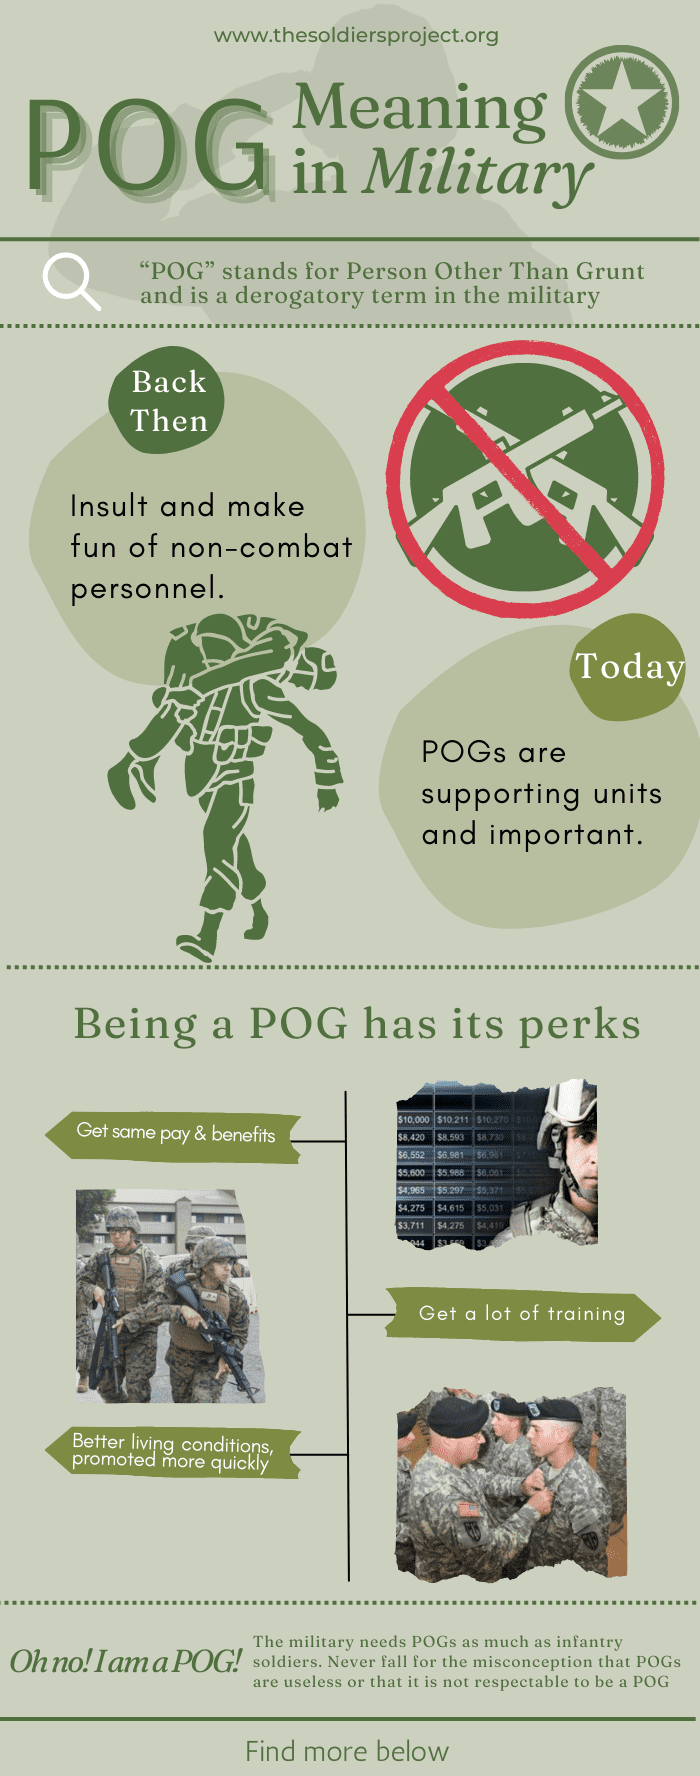 pog-meaning-military